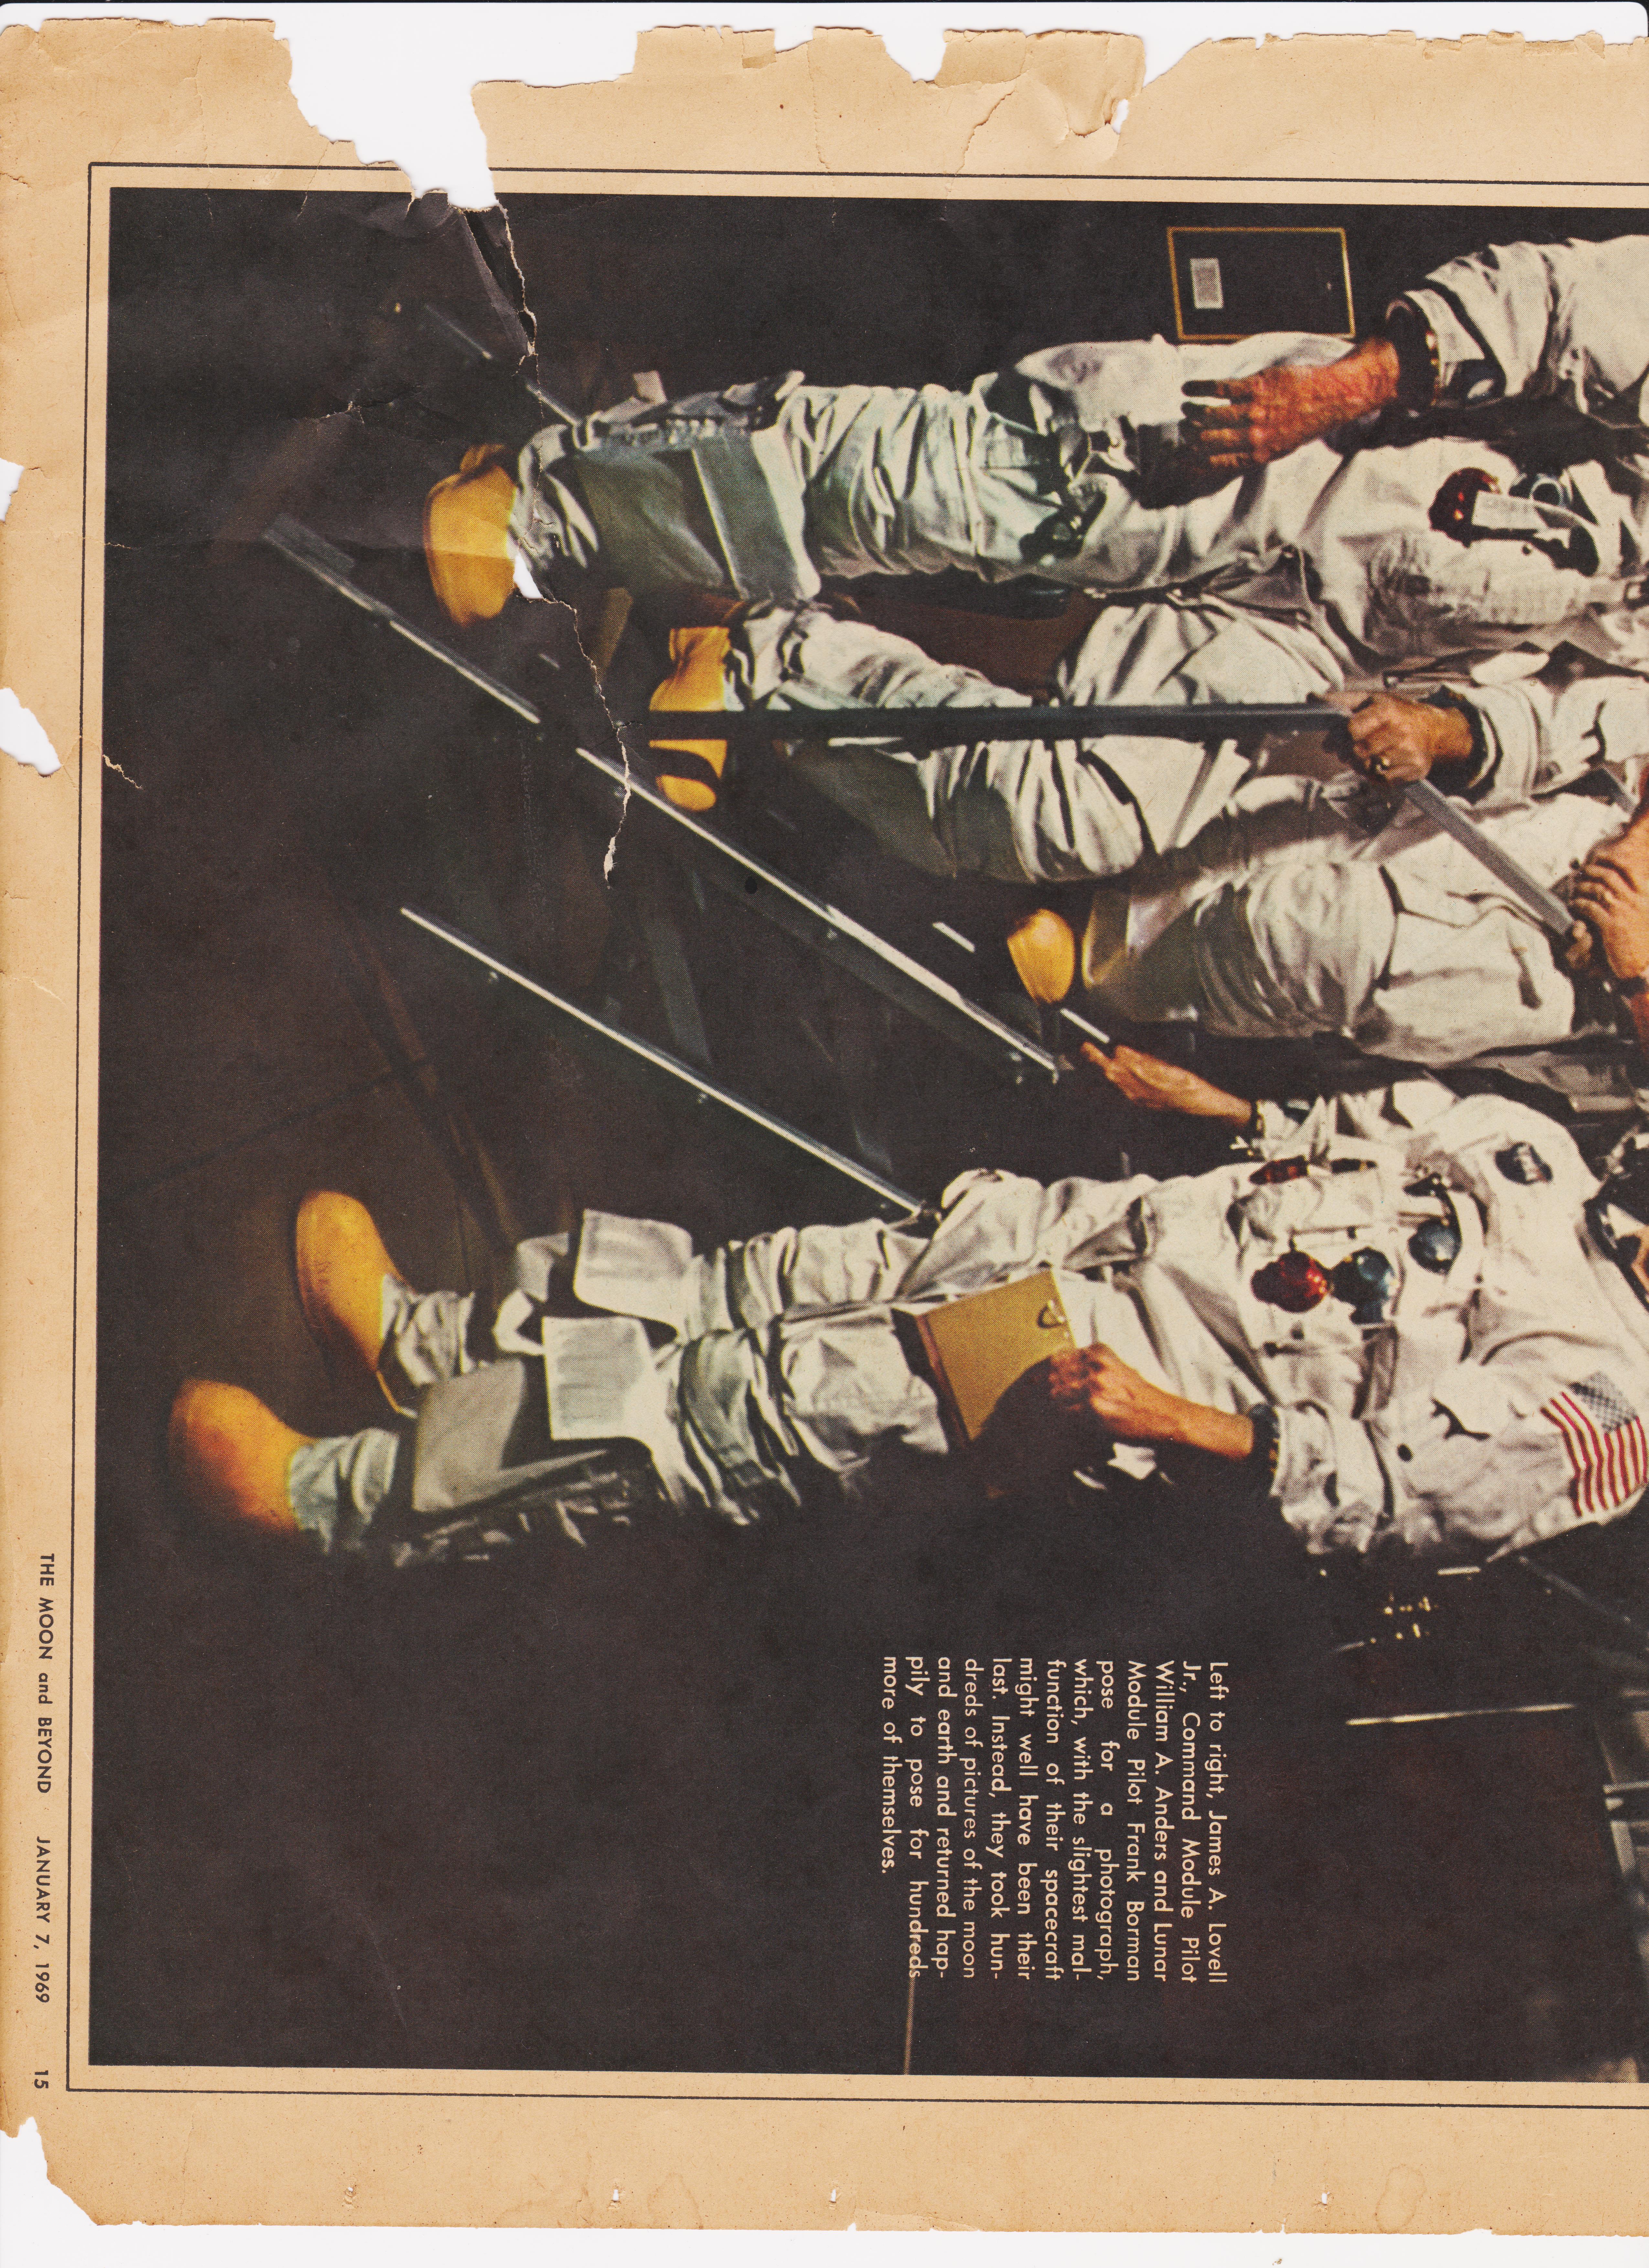 http://antiquemachinery.com/images-2019/APOLLO-8-Lowell%20-Anders-Borman%20-family-%20Portrait-pose-in-spacesuits-bottom.jpg